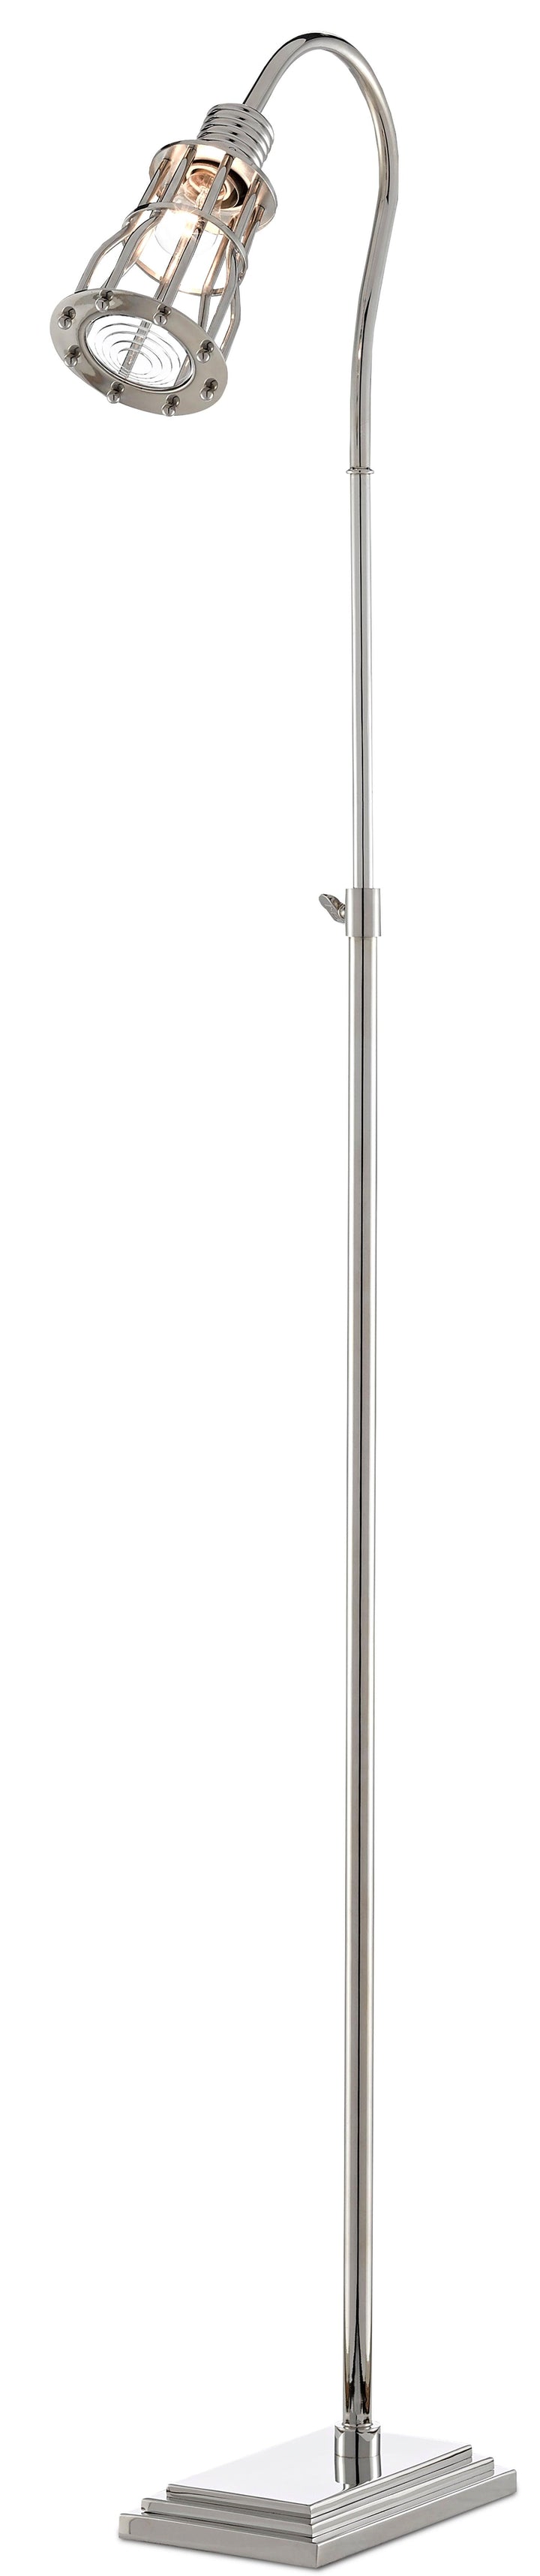 Davy Articulated Floor Lamp - Casey & Company